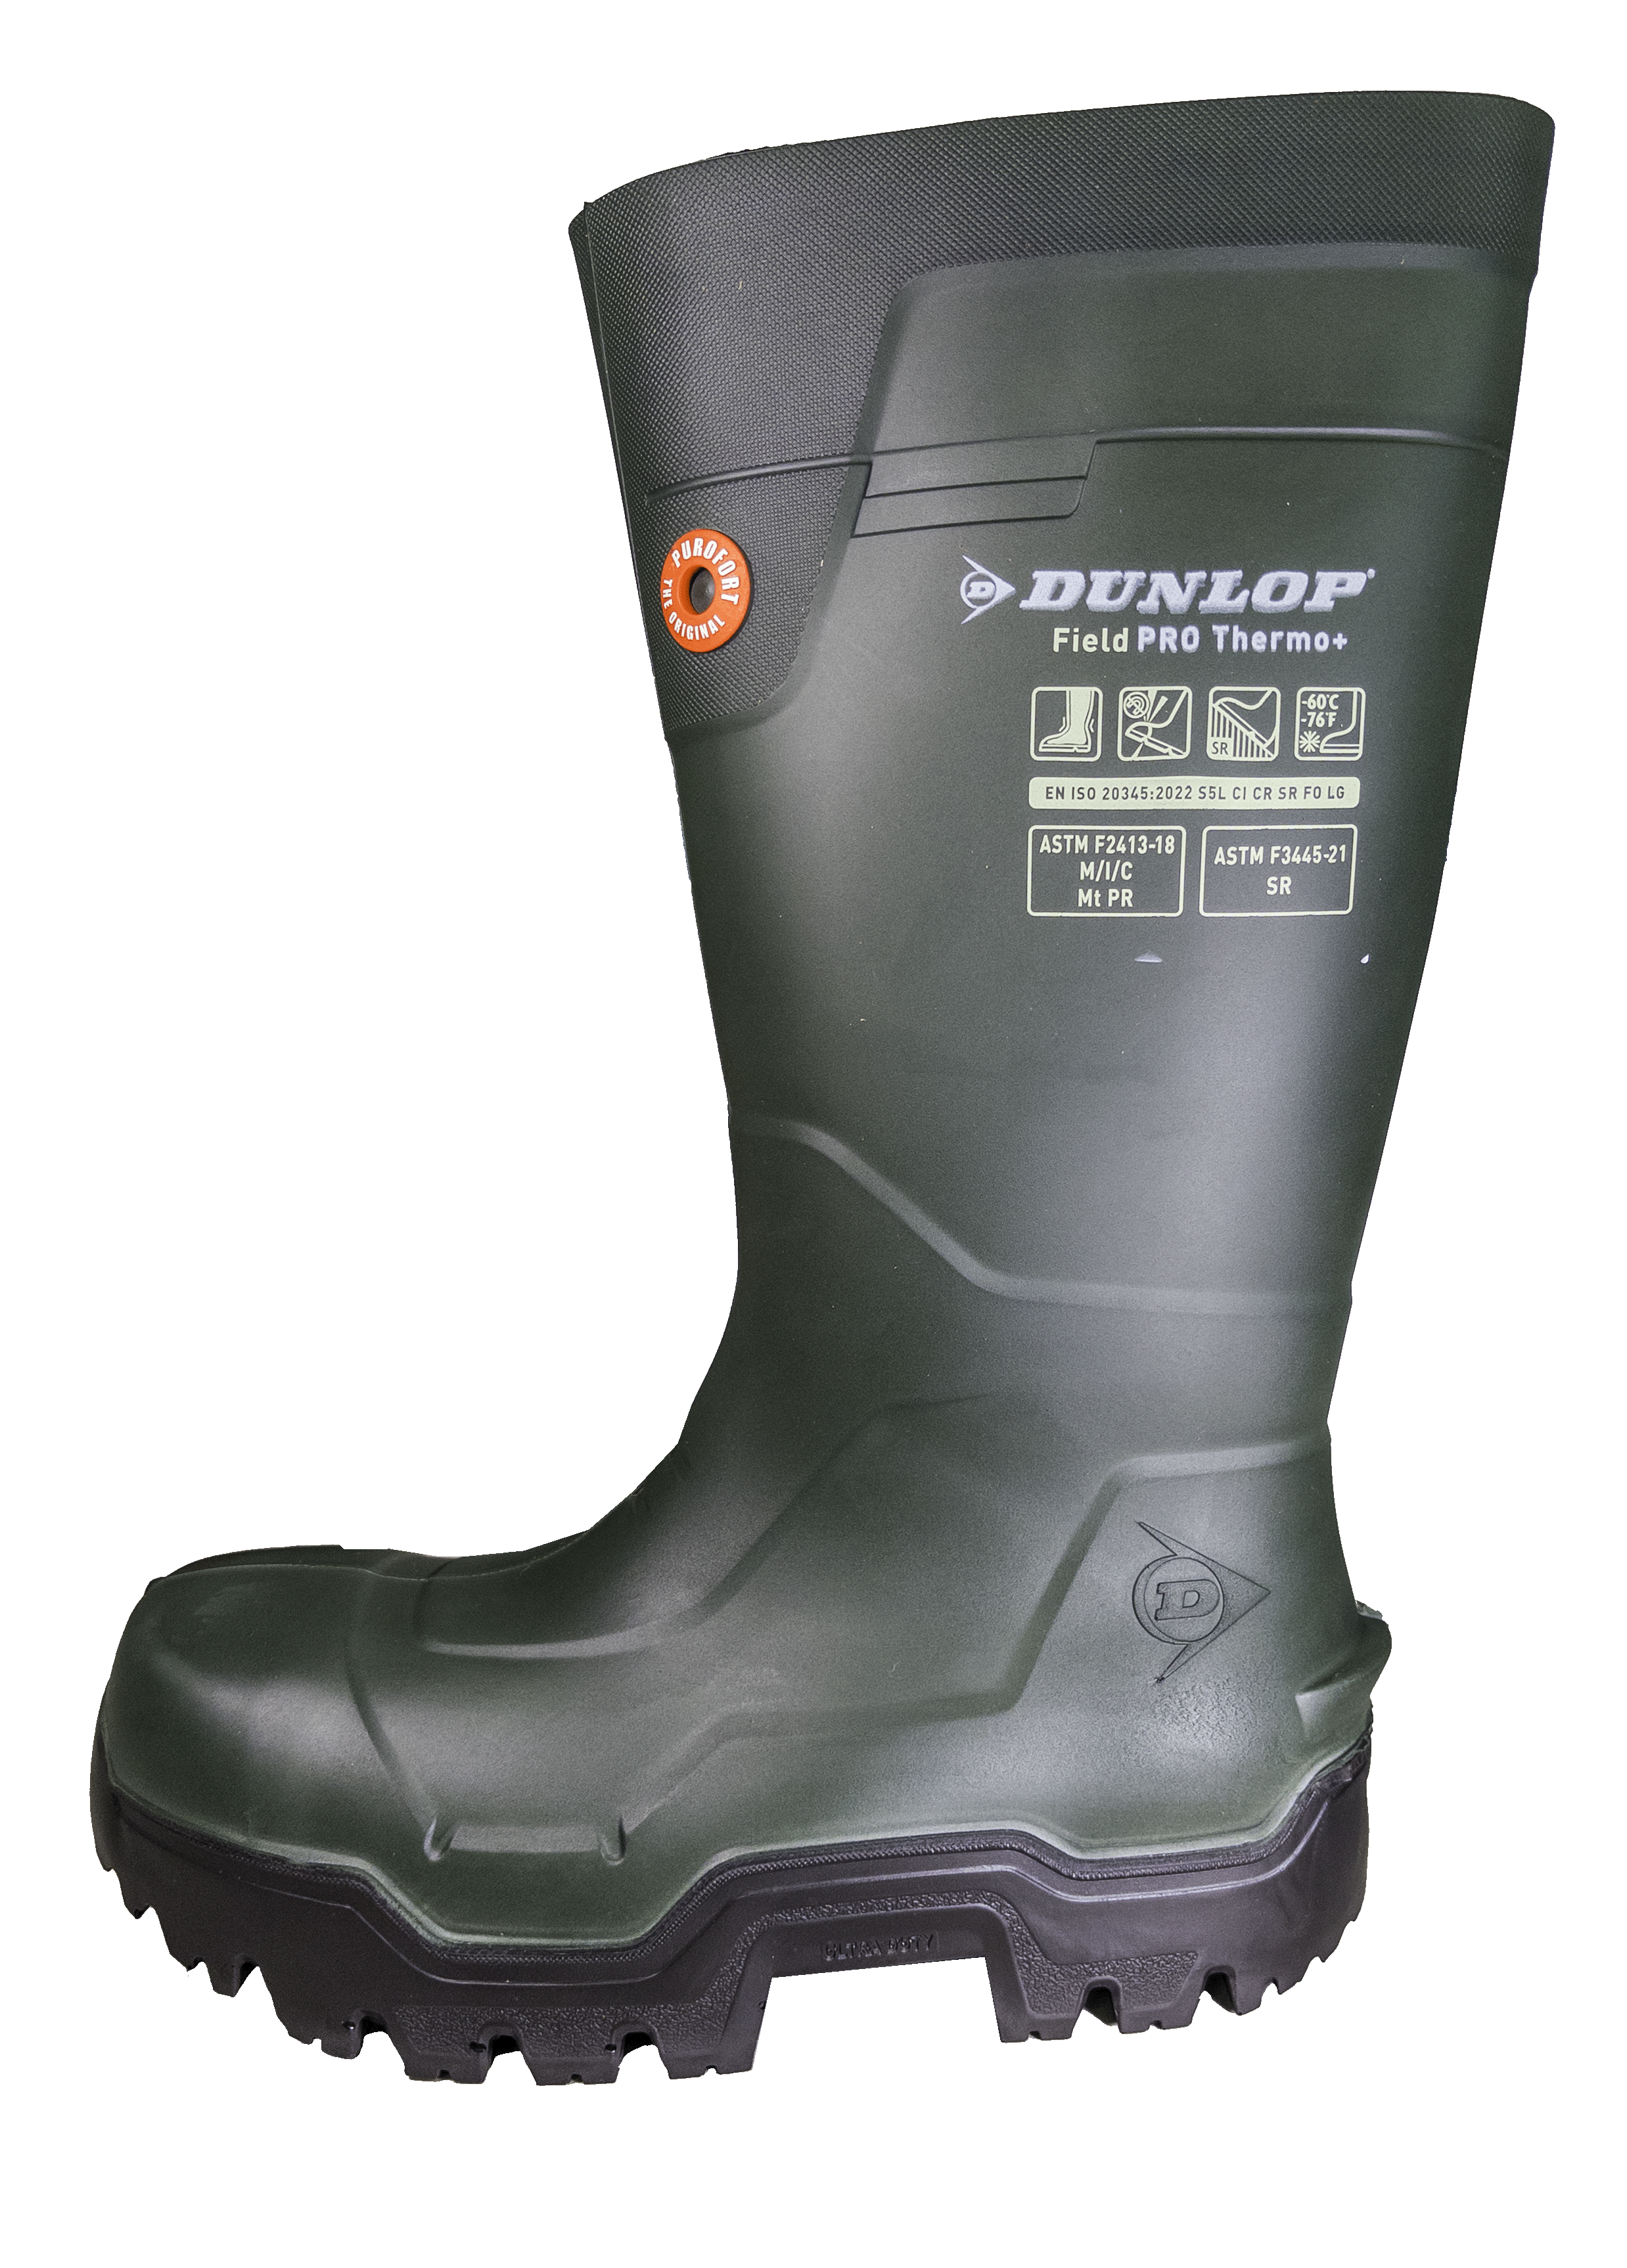 Dunlop Fieldpro Thermo